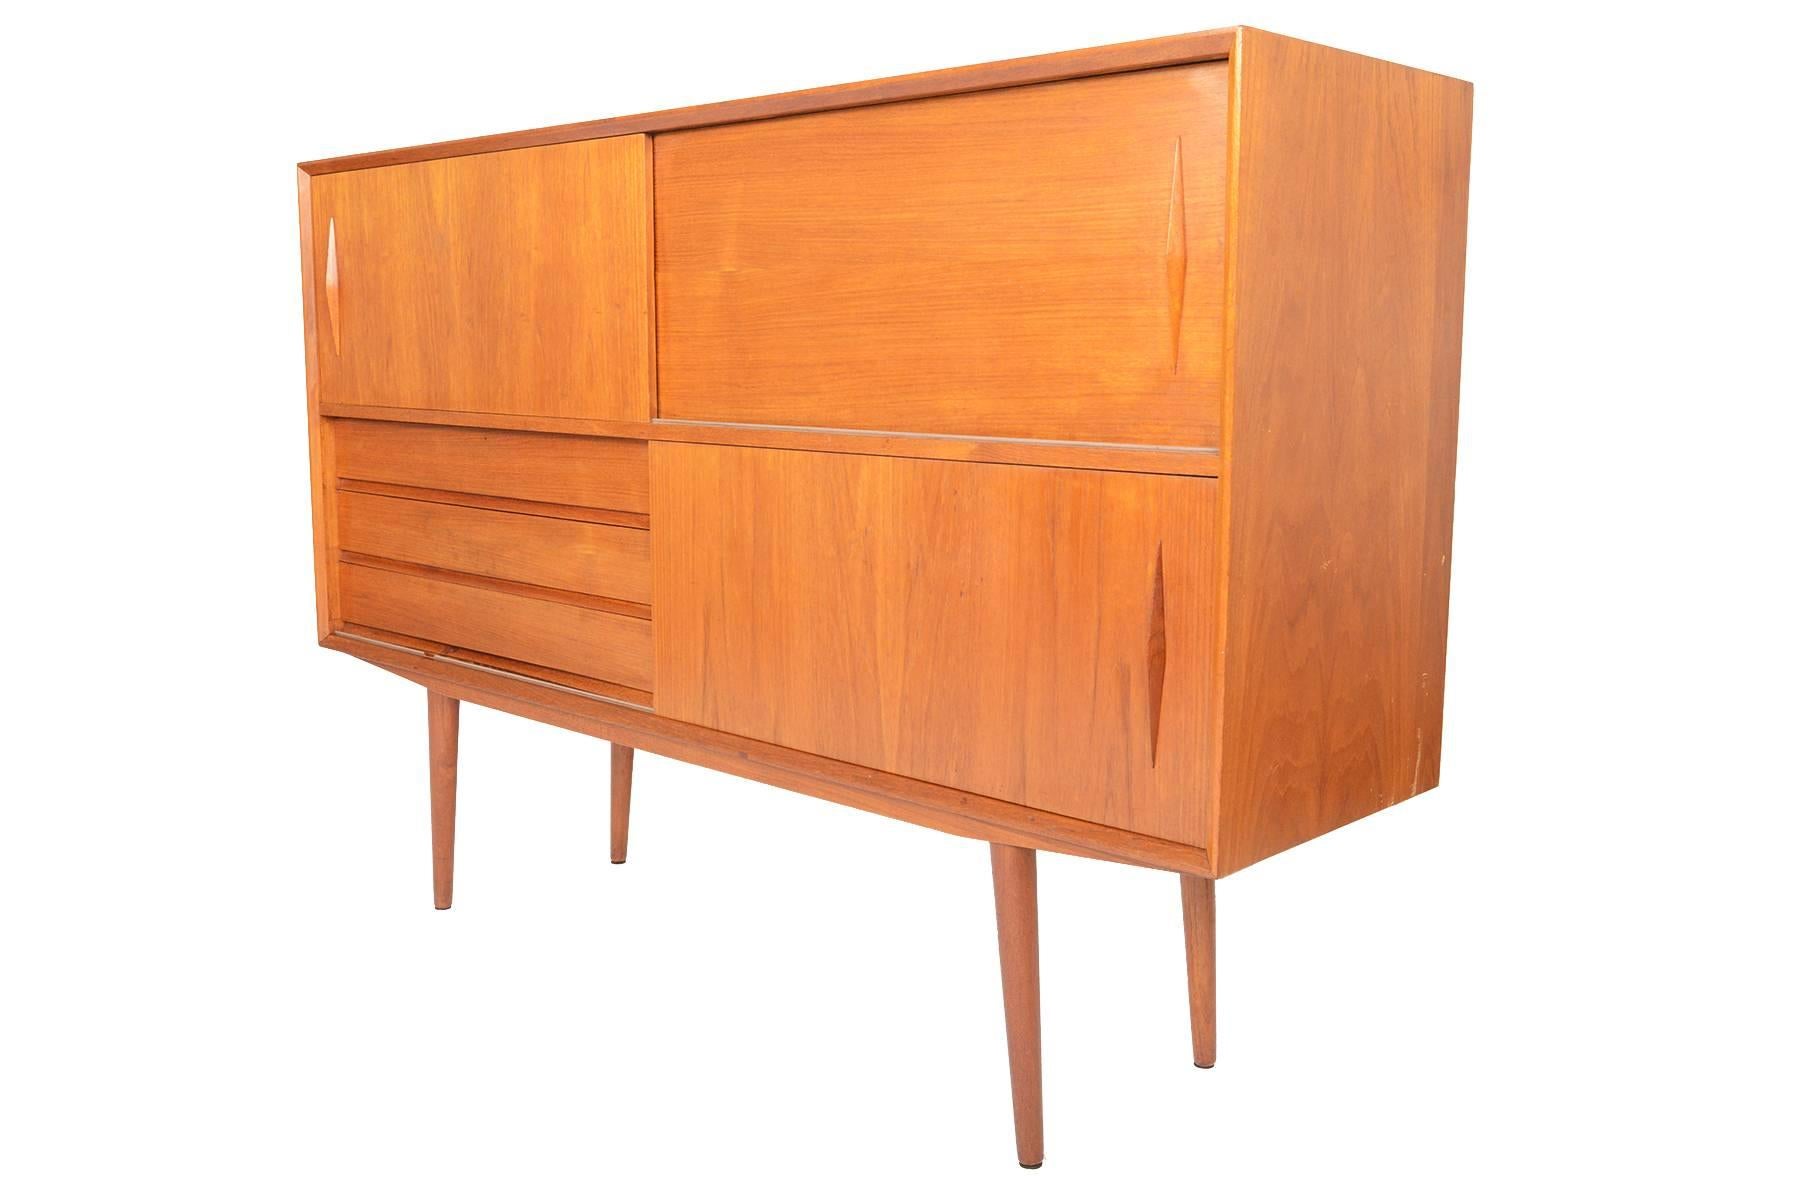 This beautiful streamline tall teak credenza is a wonderful case piece with excellent storage capabilities! Two sliding doors sit at the top of this piece adorned with diamond carved teak pulls. Doors open to reveal two bays, each with an adjustable